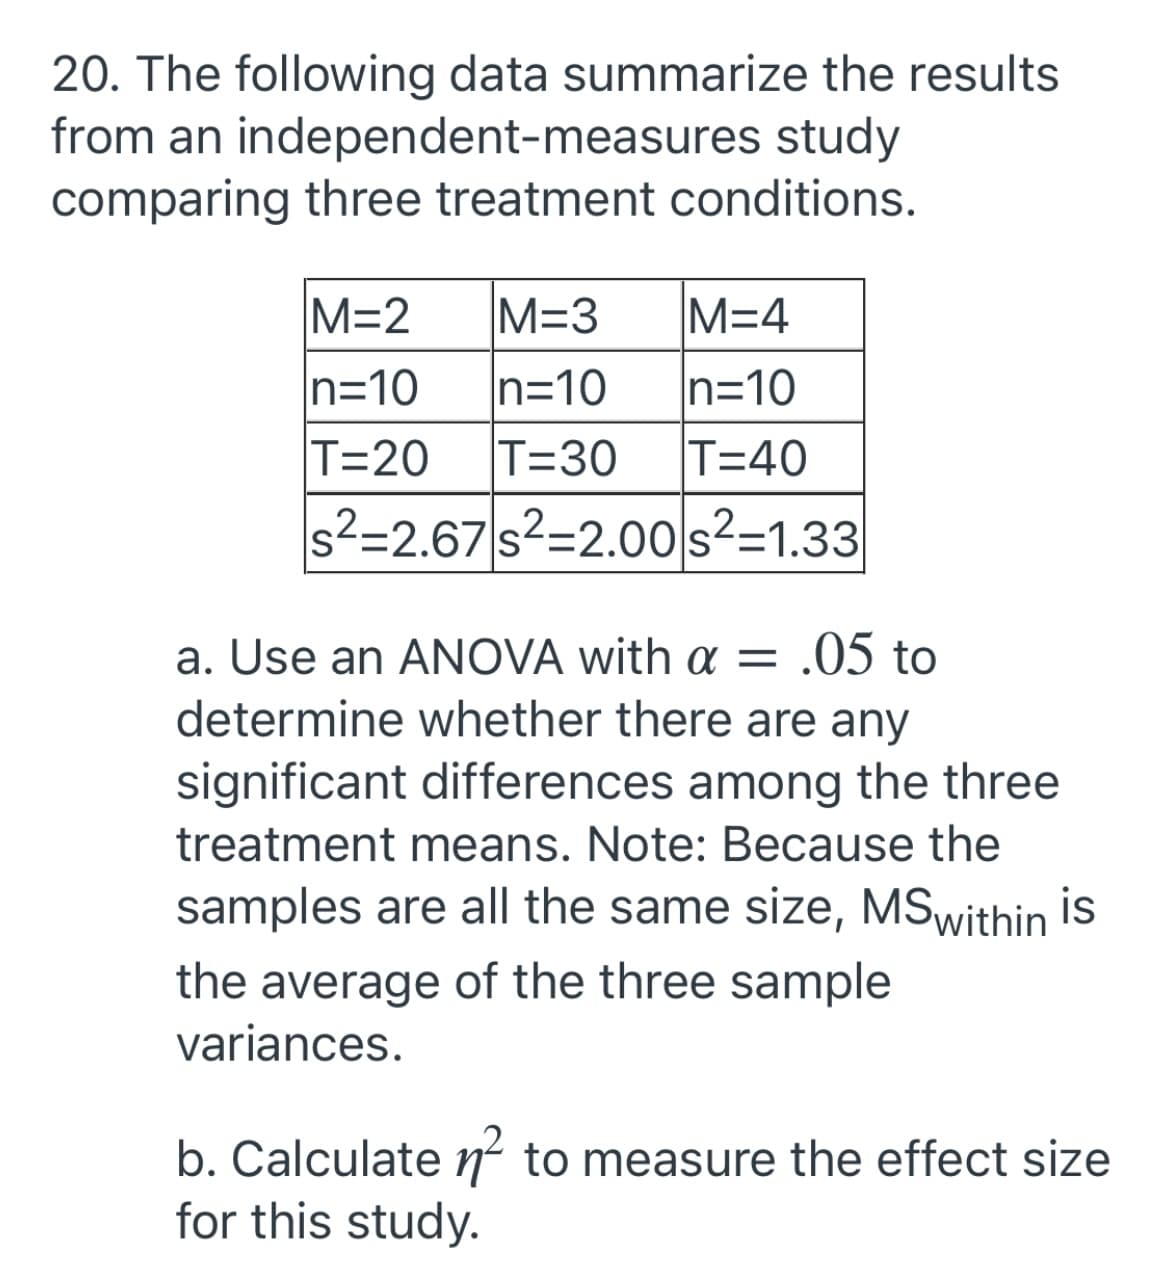 20. The following data summarize the results
from an independent-measures study
comparing three treatment conditions.
M=2
M=3
M=4
n=10
T=20
n=10
T=30
n=10
T=40
s²=2.67 s²=2.00 s²=1.33
a. Use an ANOVA with a = .05 to
determine whether there are any
significant differences among the three
treatment means. Note: Because the
samples are all the same size, MSwithin is
the average of the three sample
variances.
b. Calculate n to measure the effect size
for this study.
